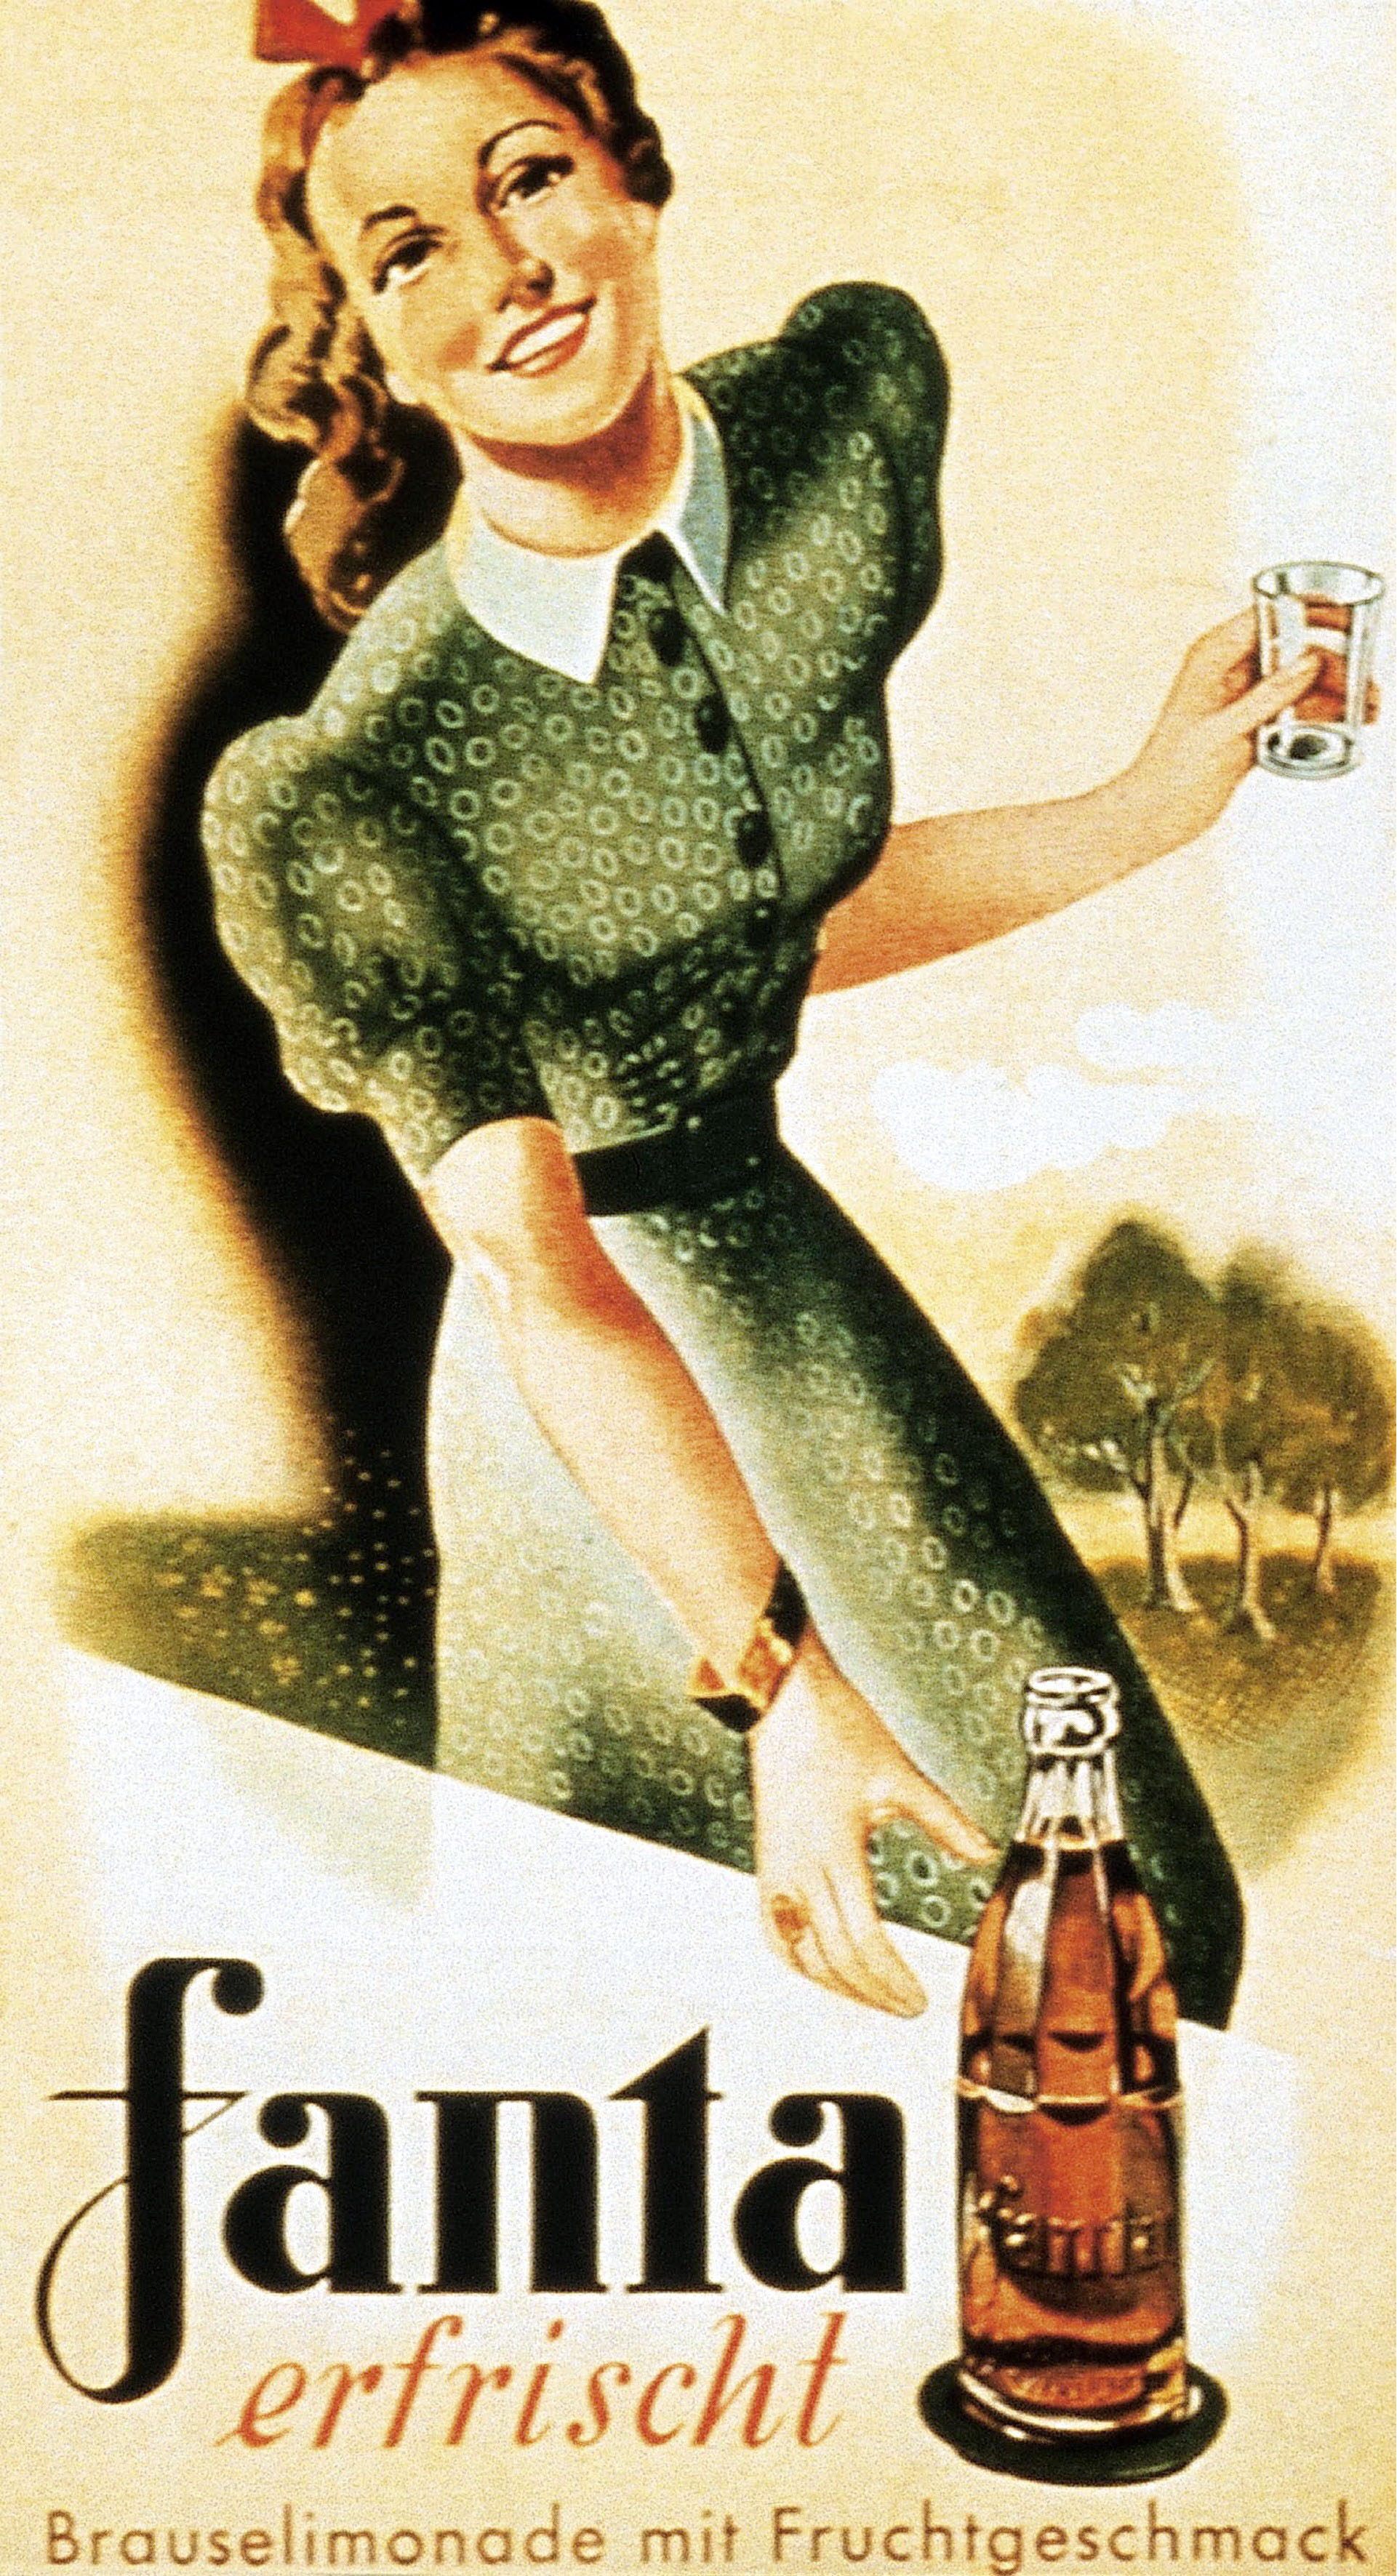 A 1950 Fanta advertisement that compares it to refreshing lemonade.